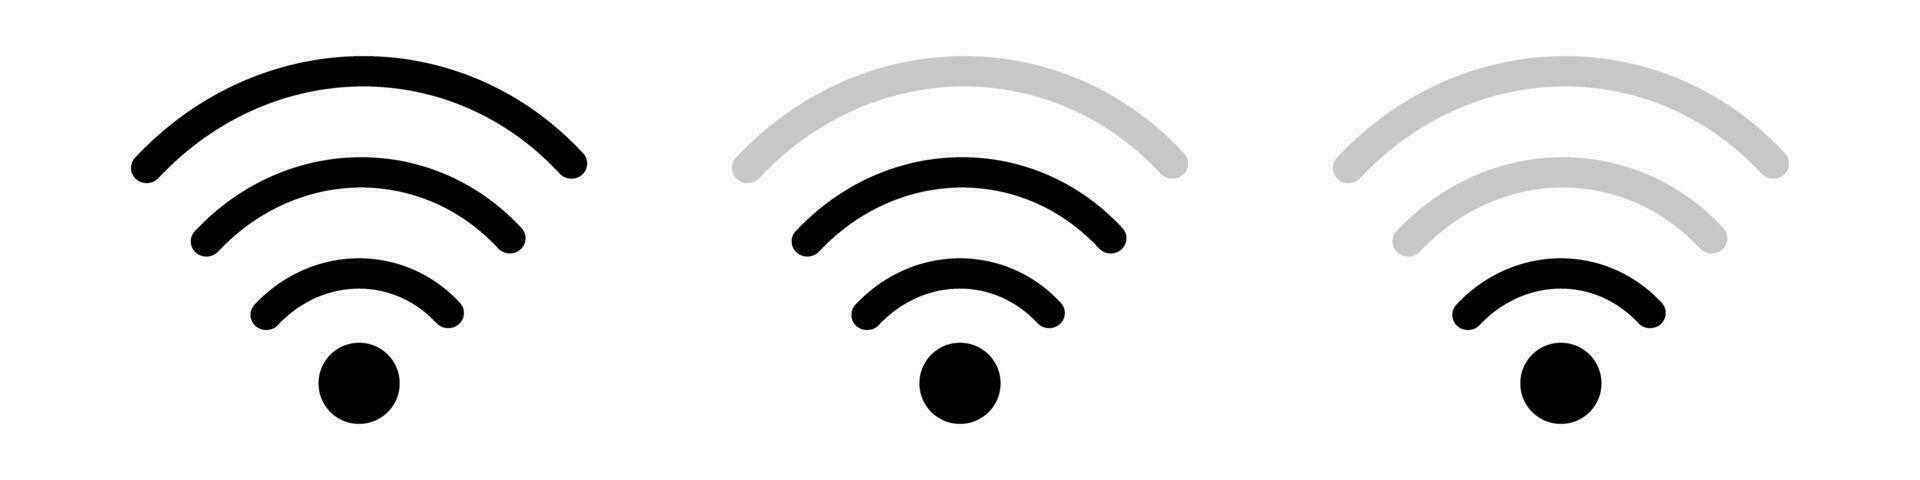 Network icons with different styles for each signal strength level. Wi-Fi strength level and a network icon for each level of signal strength. Vector. vector